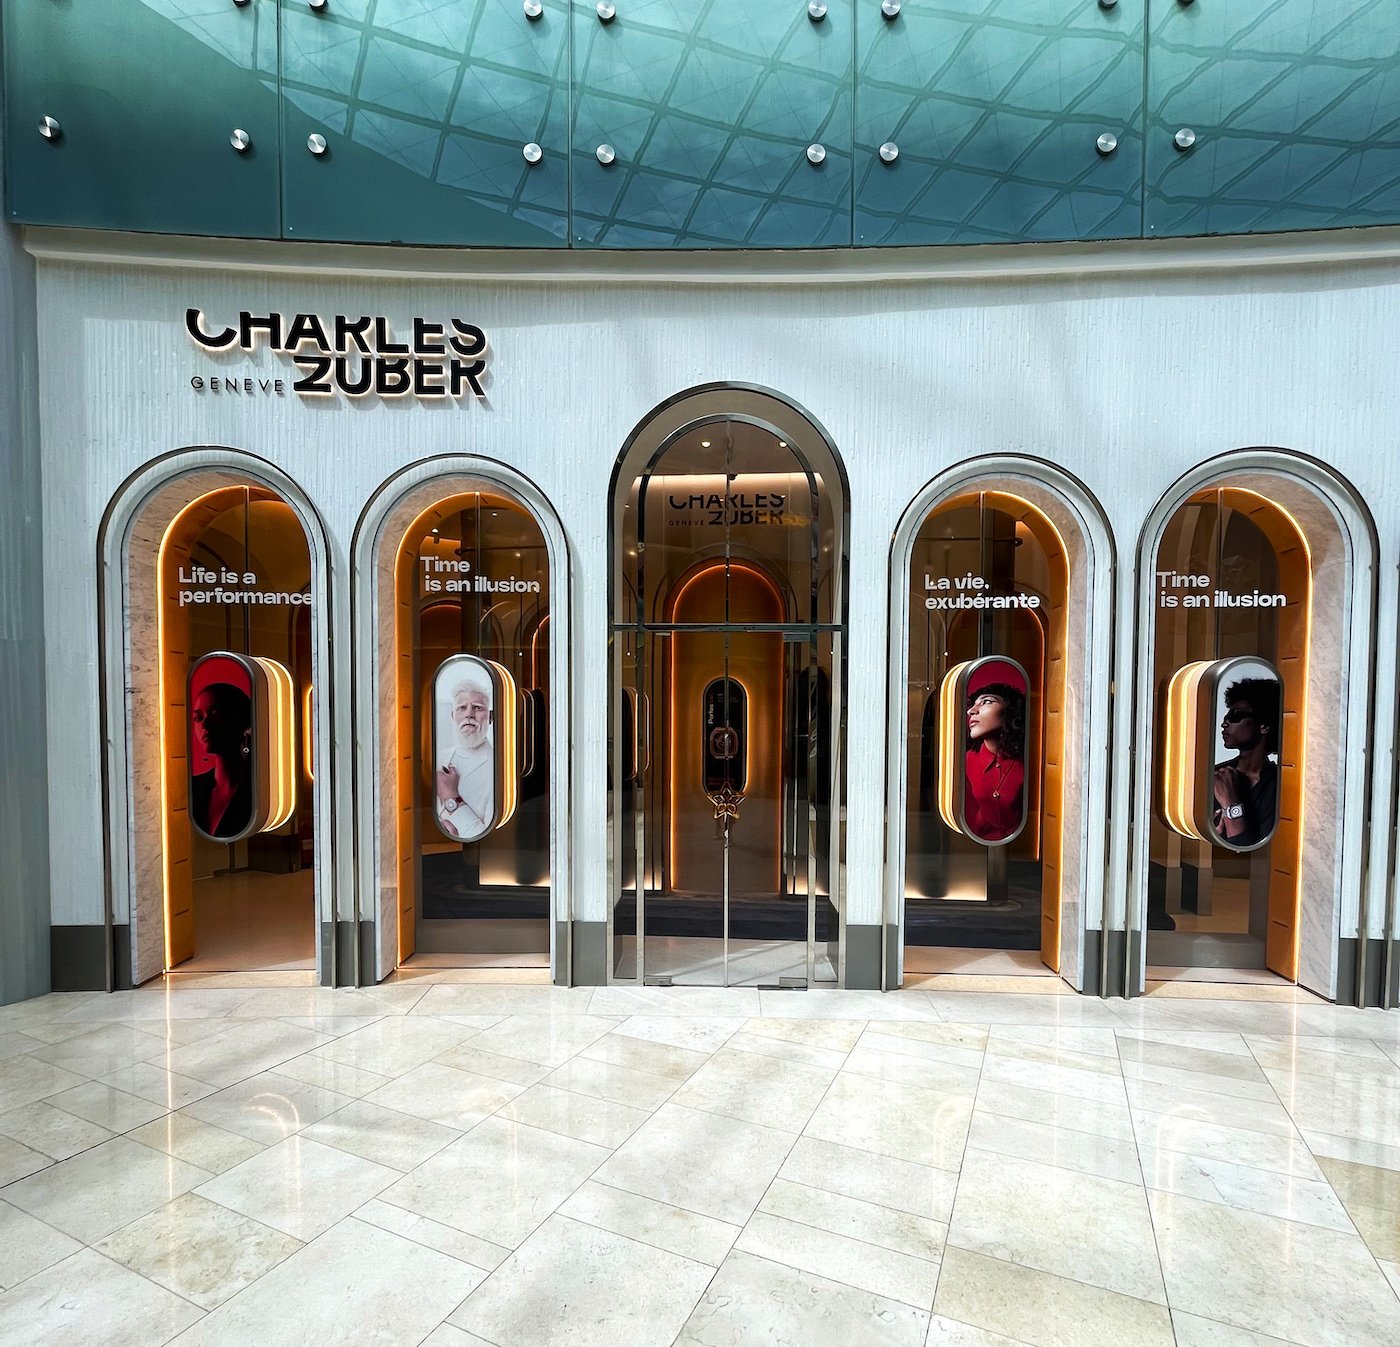 Charles Zuber opens its first boutique worldwide in Abu Dhabi